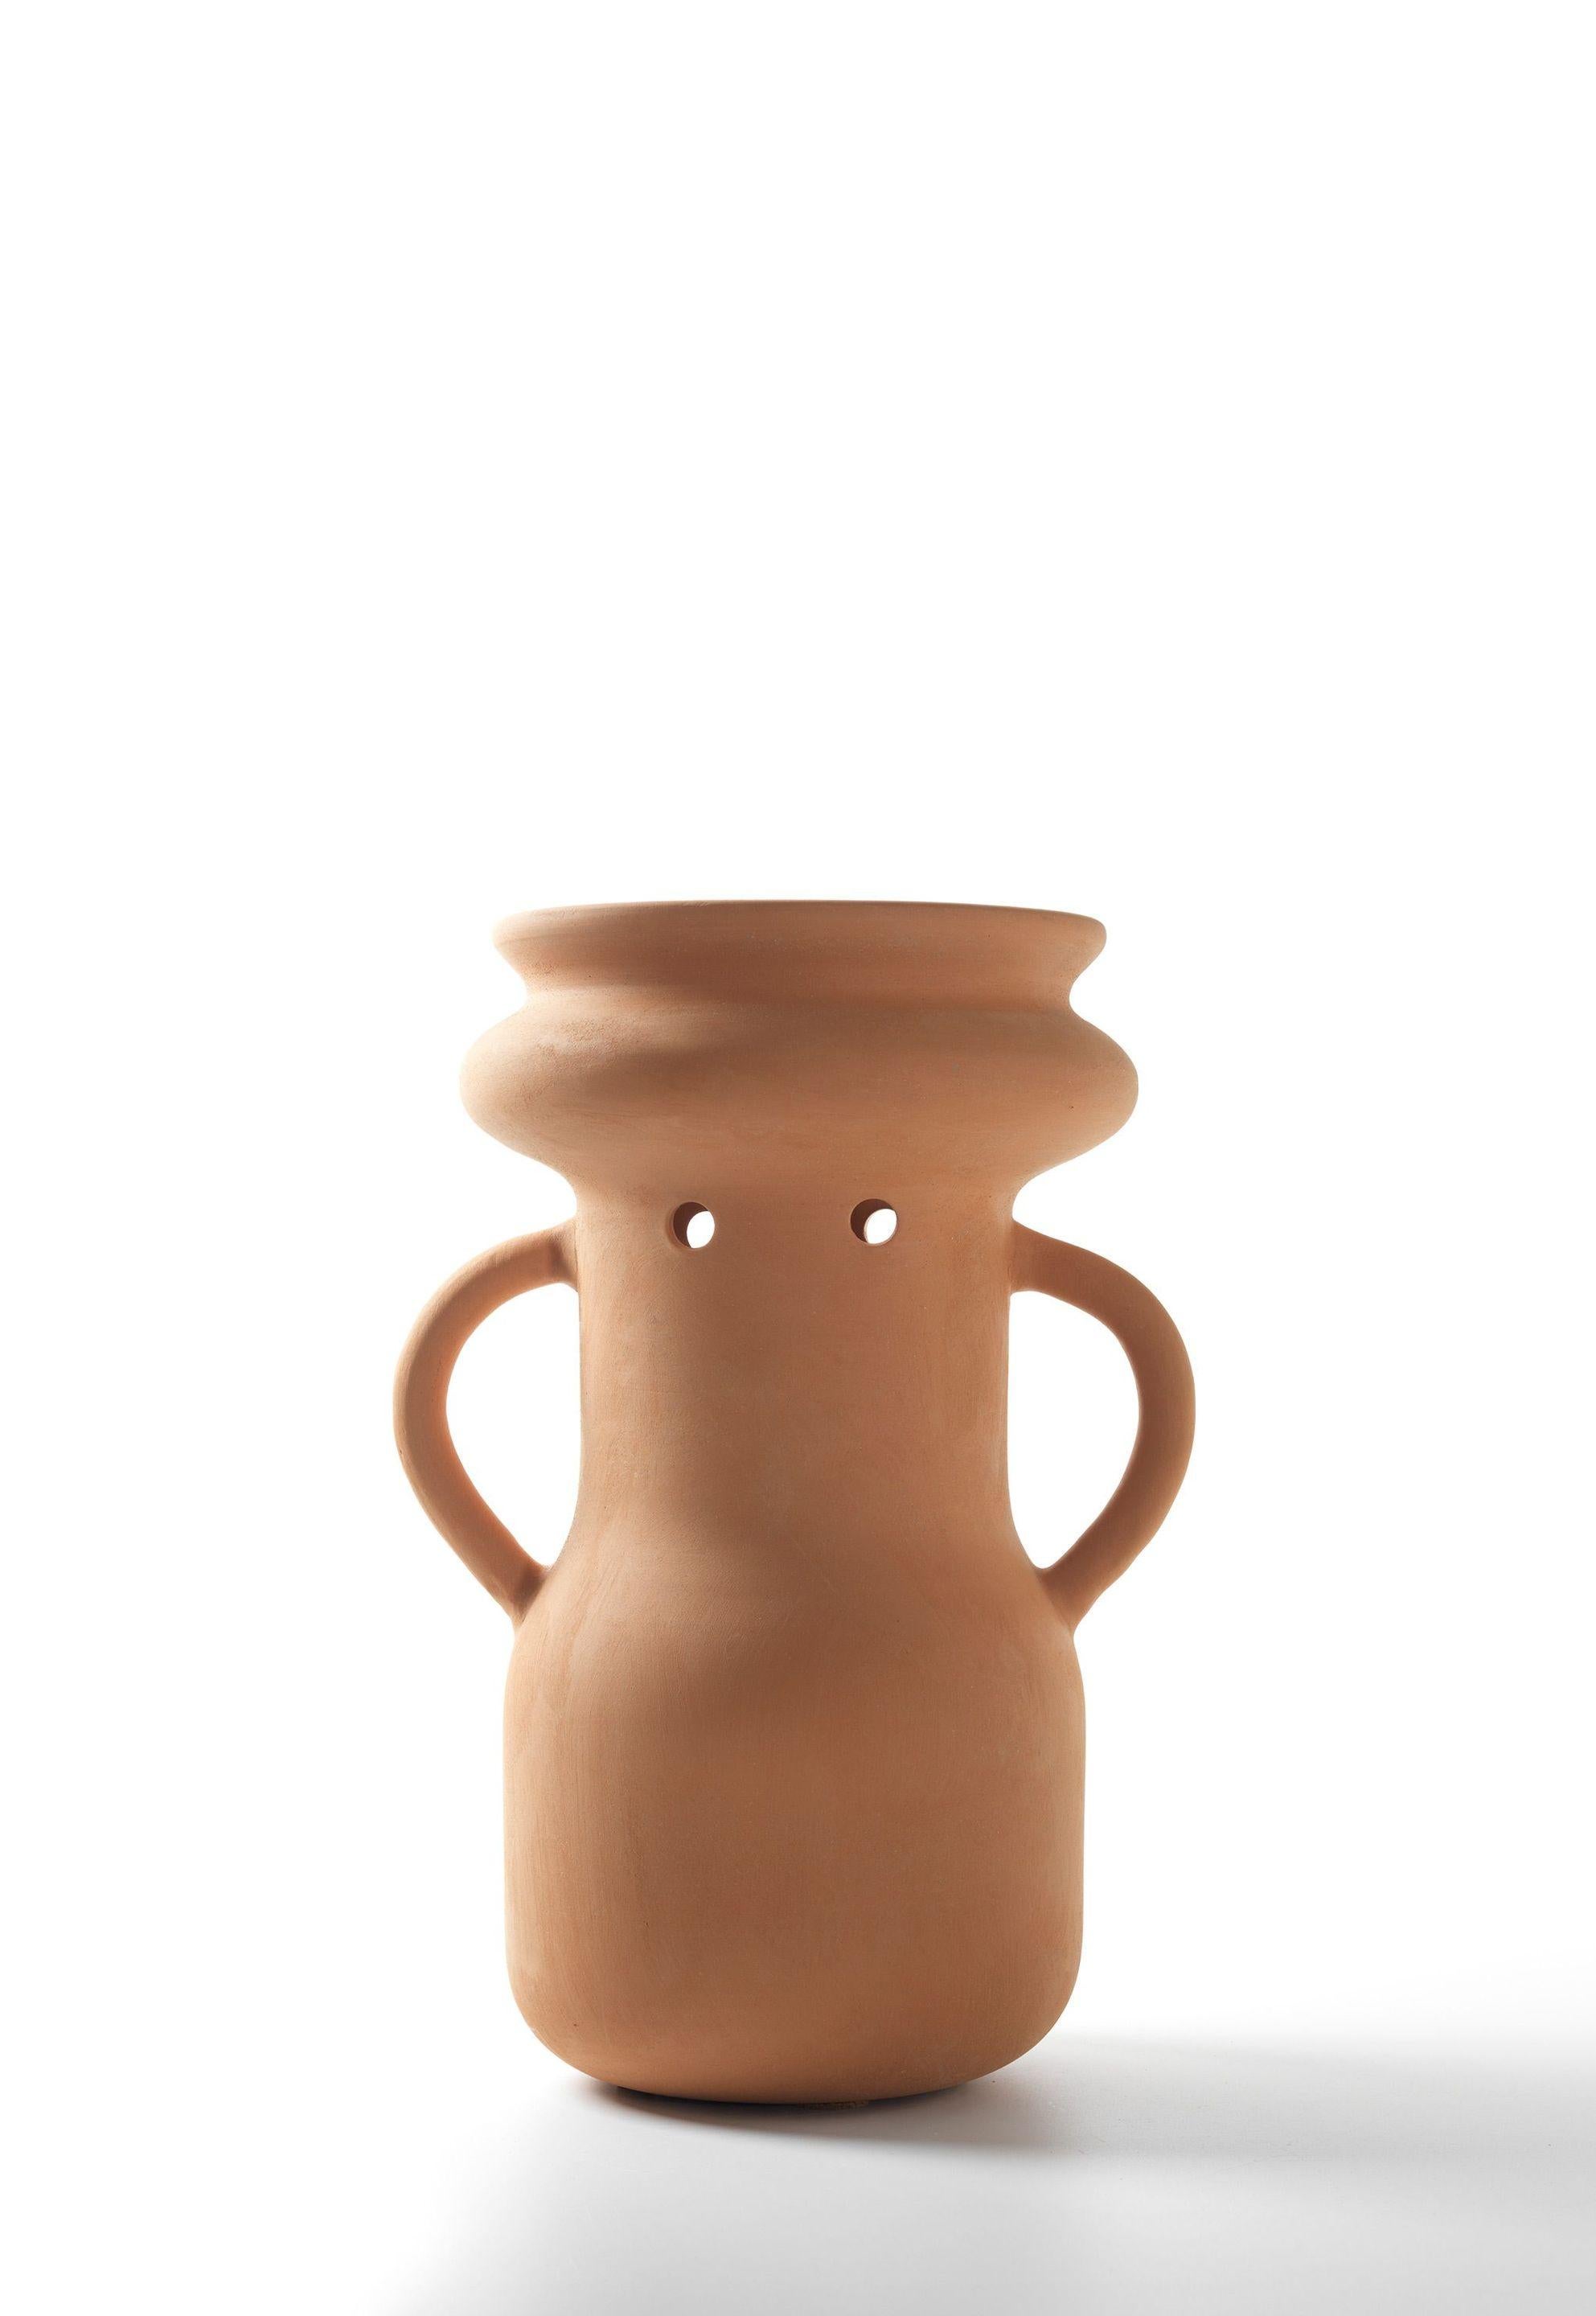 Number 4 gardenia vase by Jaime Hayon 
Dimensions: Diameter 26 x Height 37 cm 
Materials: Handmade terracotta with a waterproof treatment.
Could be used outdoors. Also available in two other designs.


Jaime Hayon designed the Gardenia Vases